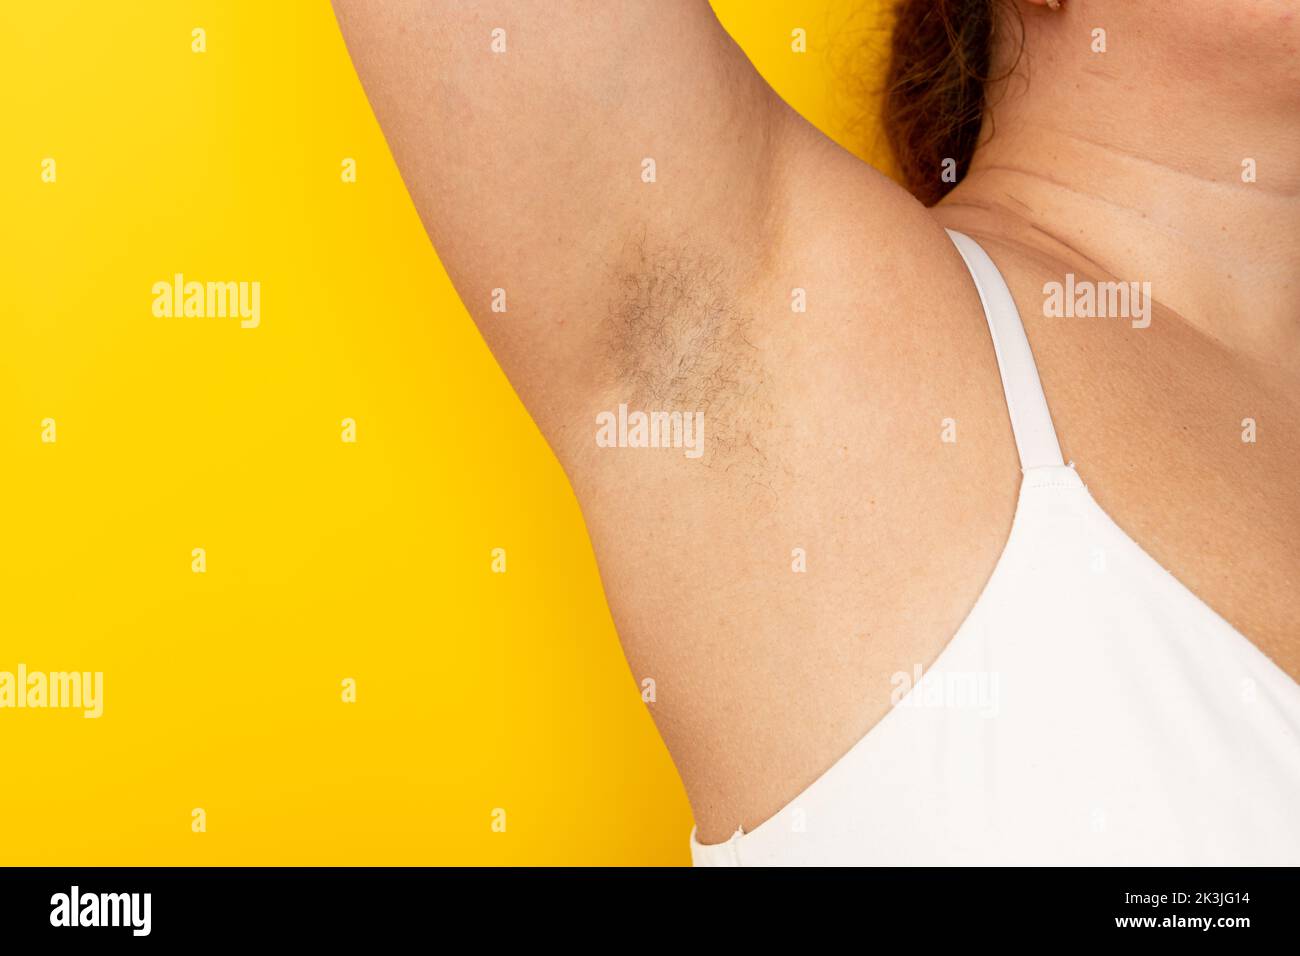 Woman touch hairy underarms with hand closeup, free copy space, yellow background. Raised arm with armpit hair. Female beauty trend, freedom, feminism Stock Photo